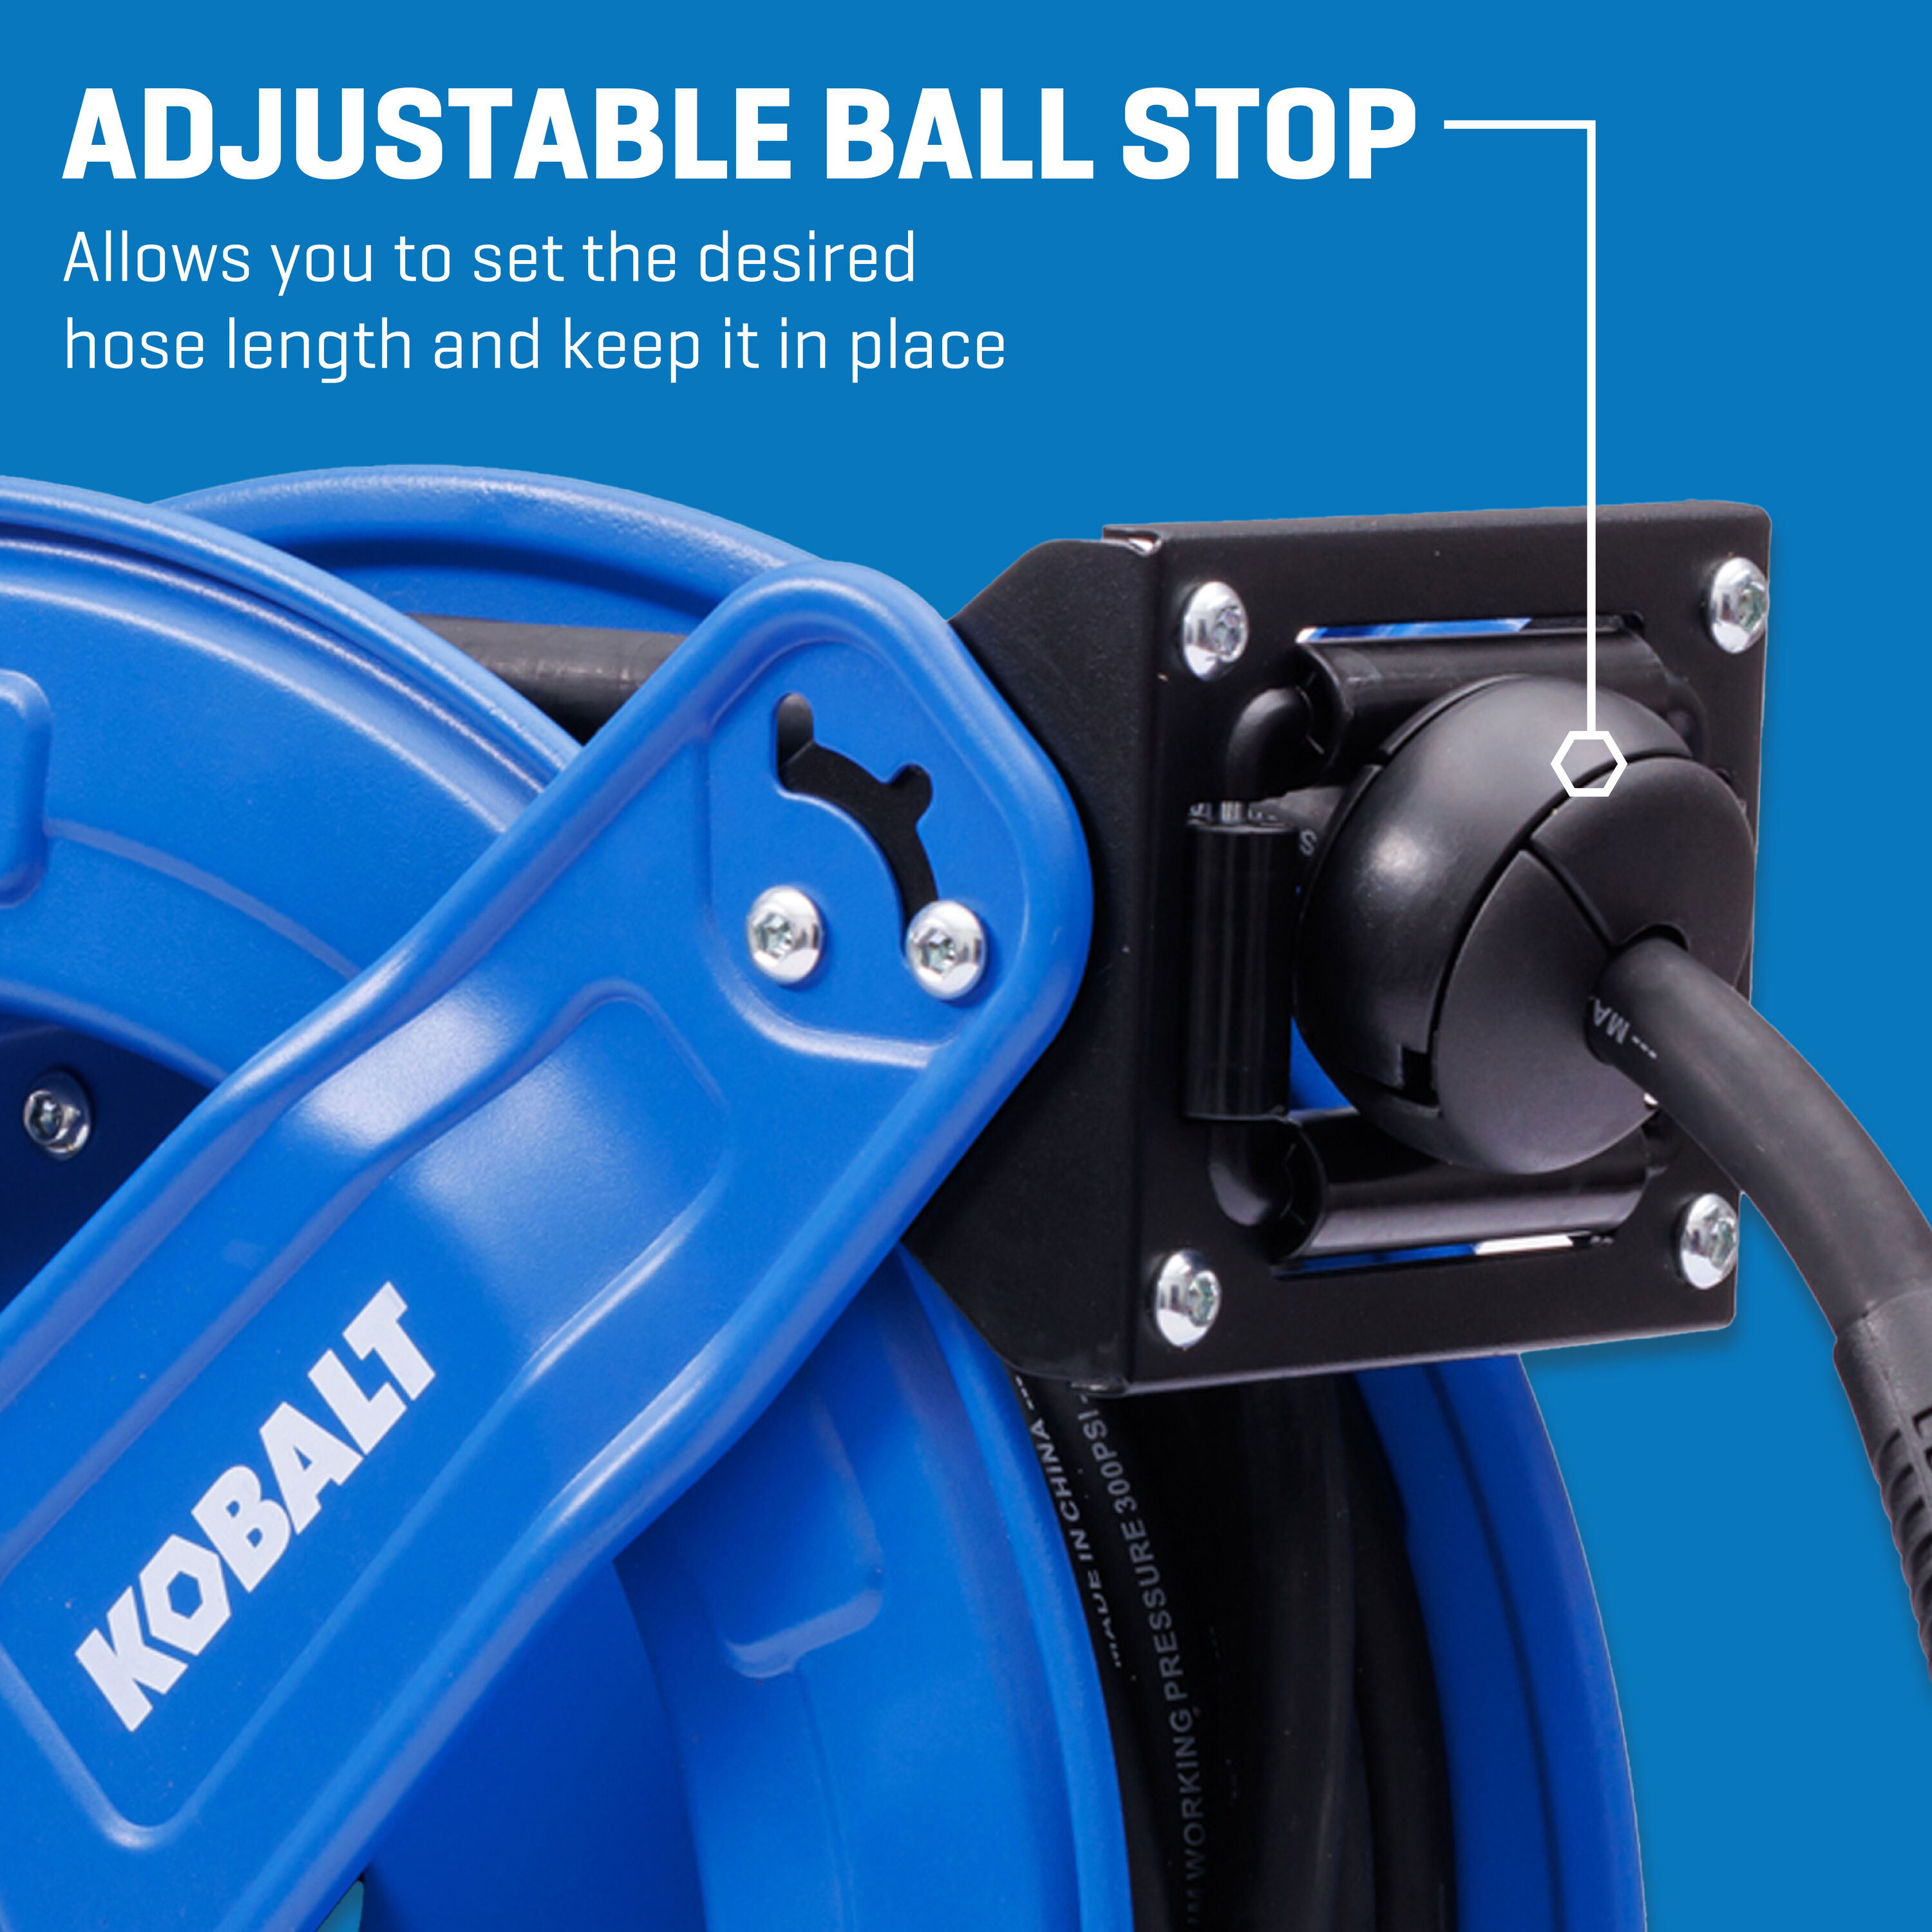 Kobalt Enclosed Retractable Reel w/3/8-in x 50-Ft Poly Hybrid Hose in the Air  Compressor Hoses department at